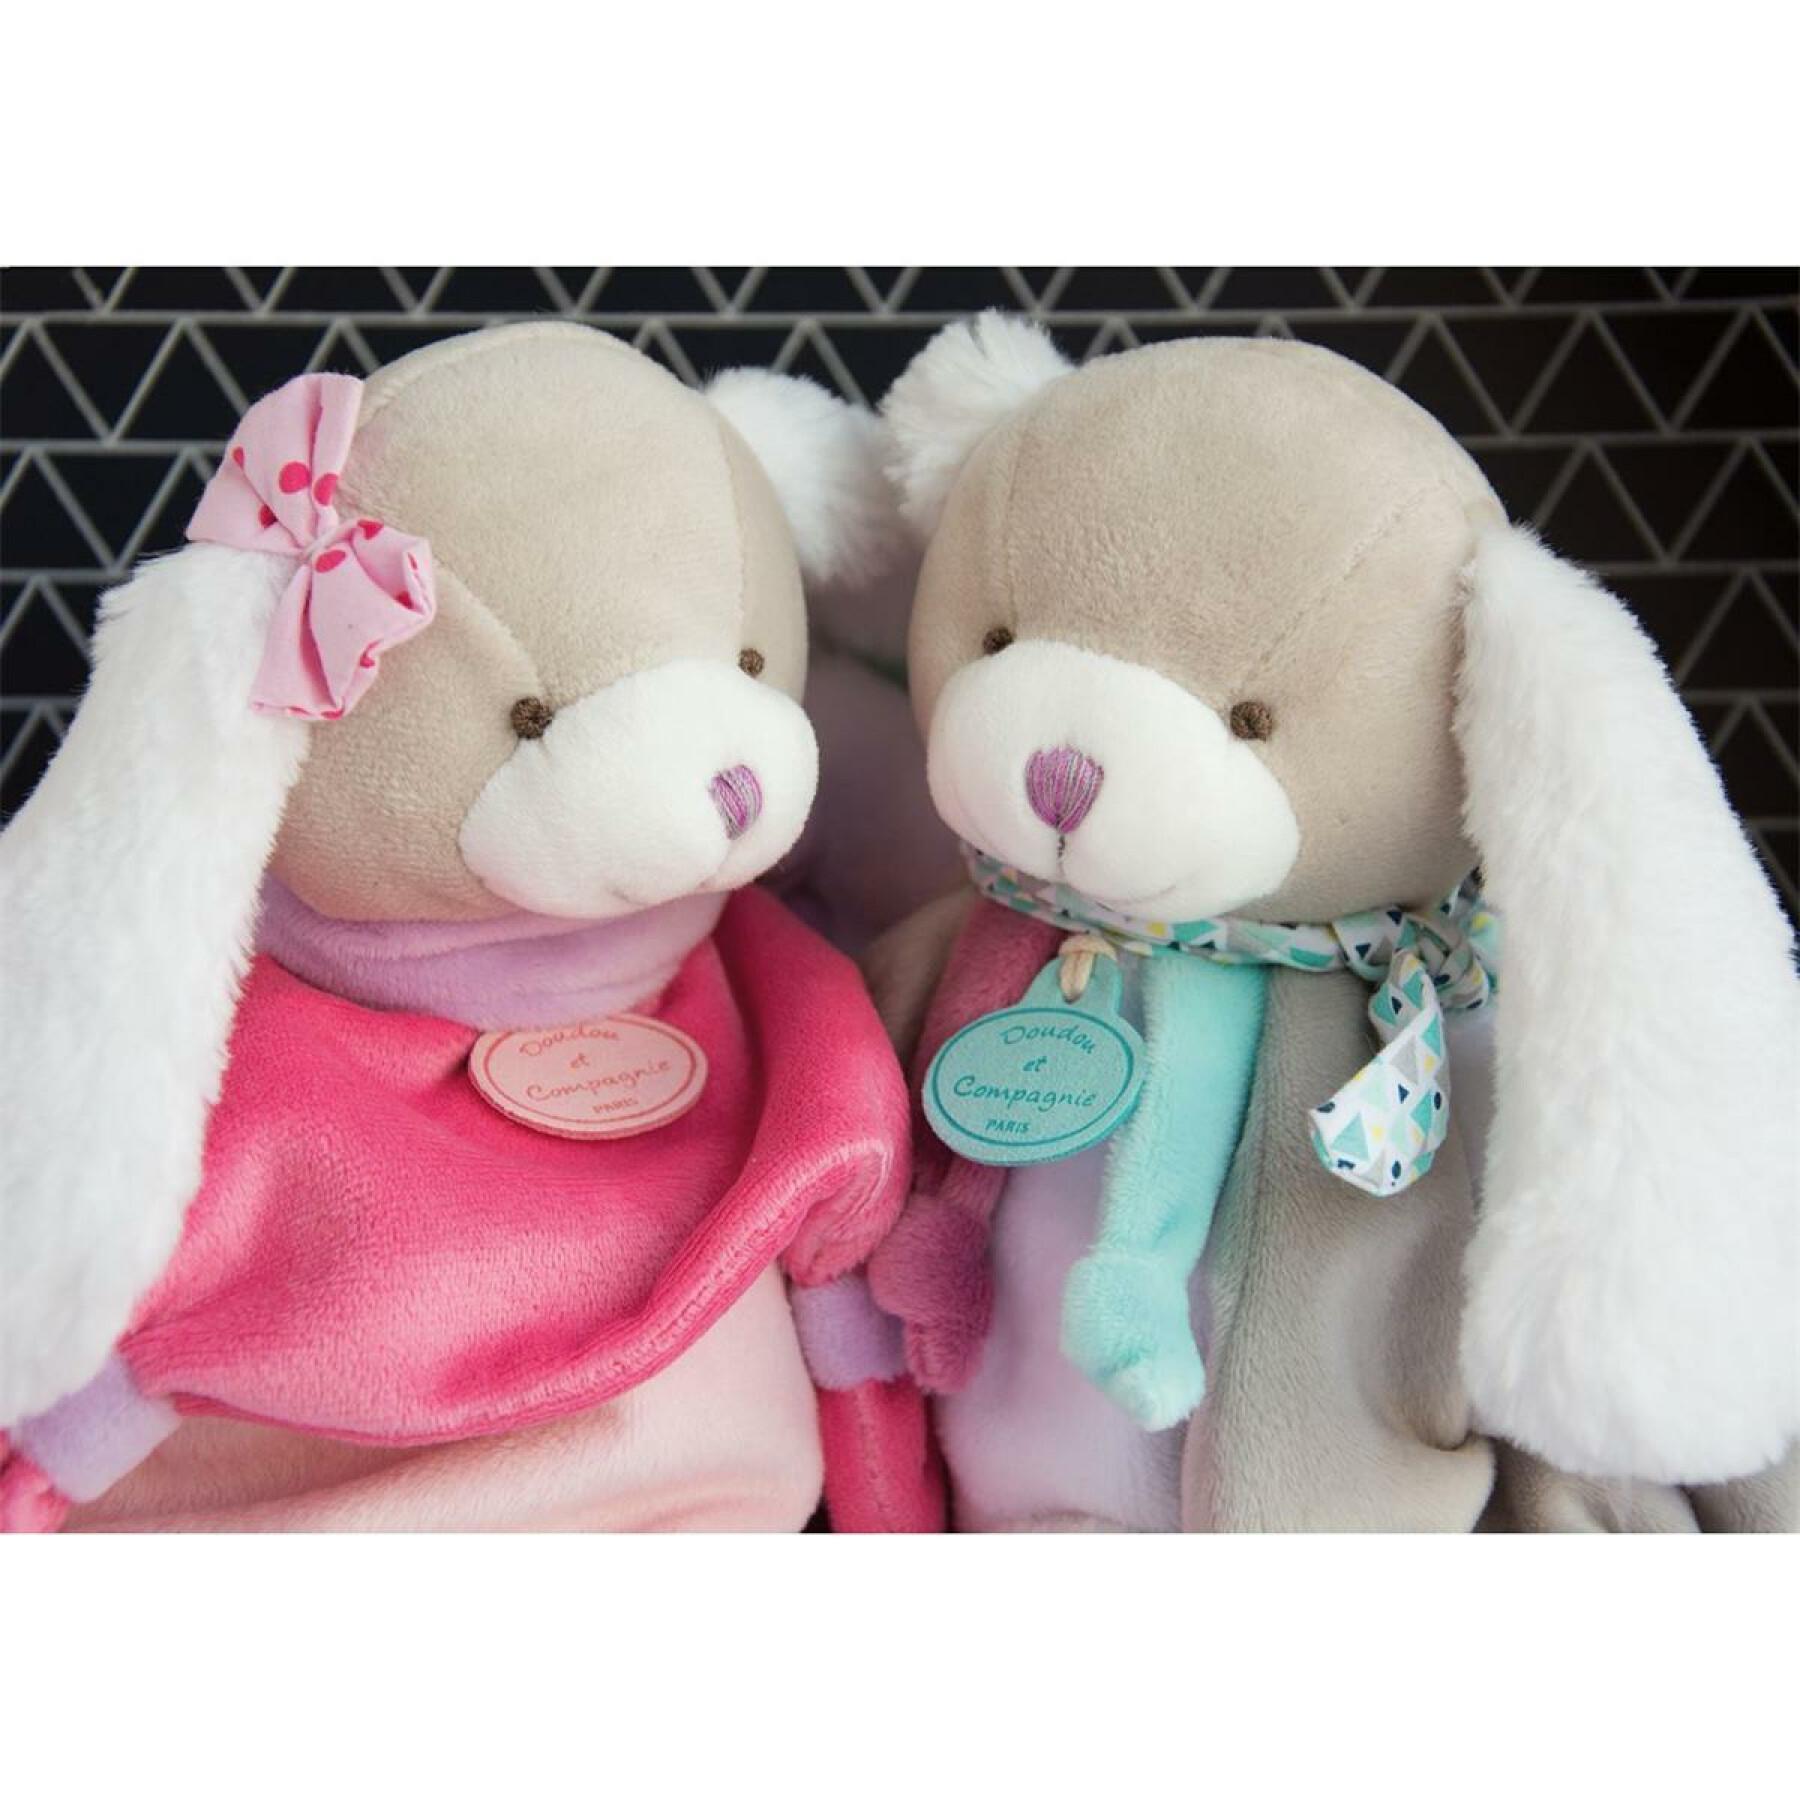 Puppet Doudou & compagnie Toopi Le Chien Girl